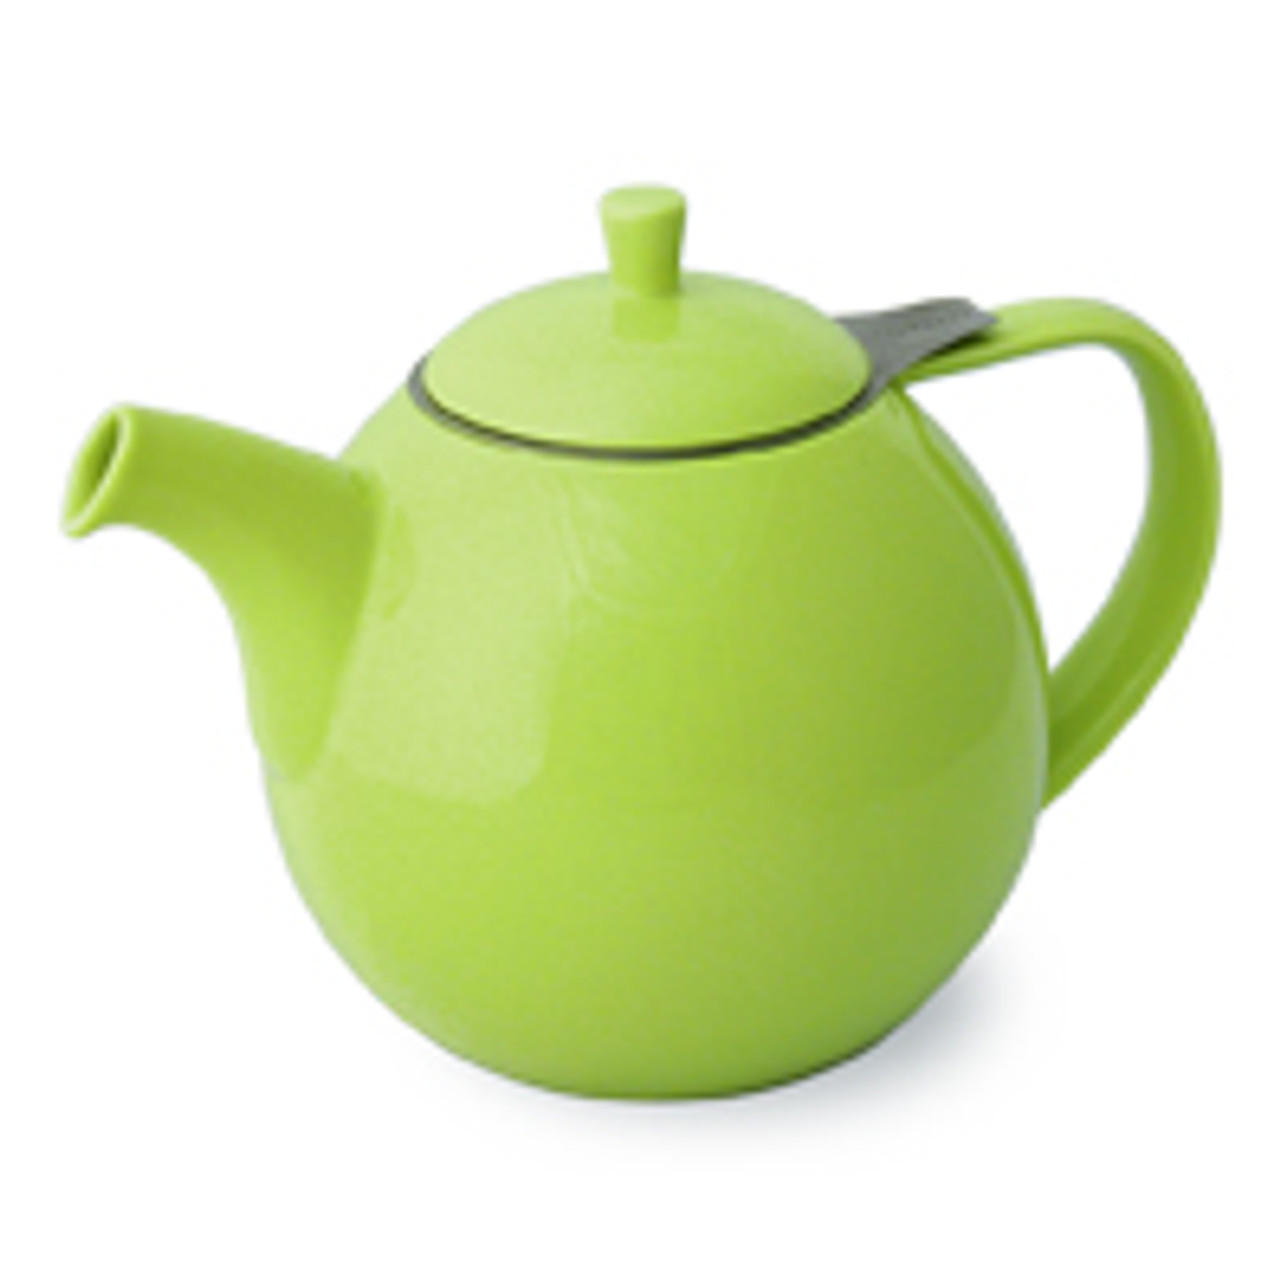 Curve Teapot With Infuser 45 oz Turquoise